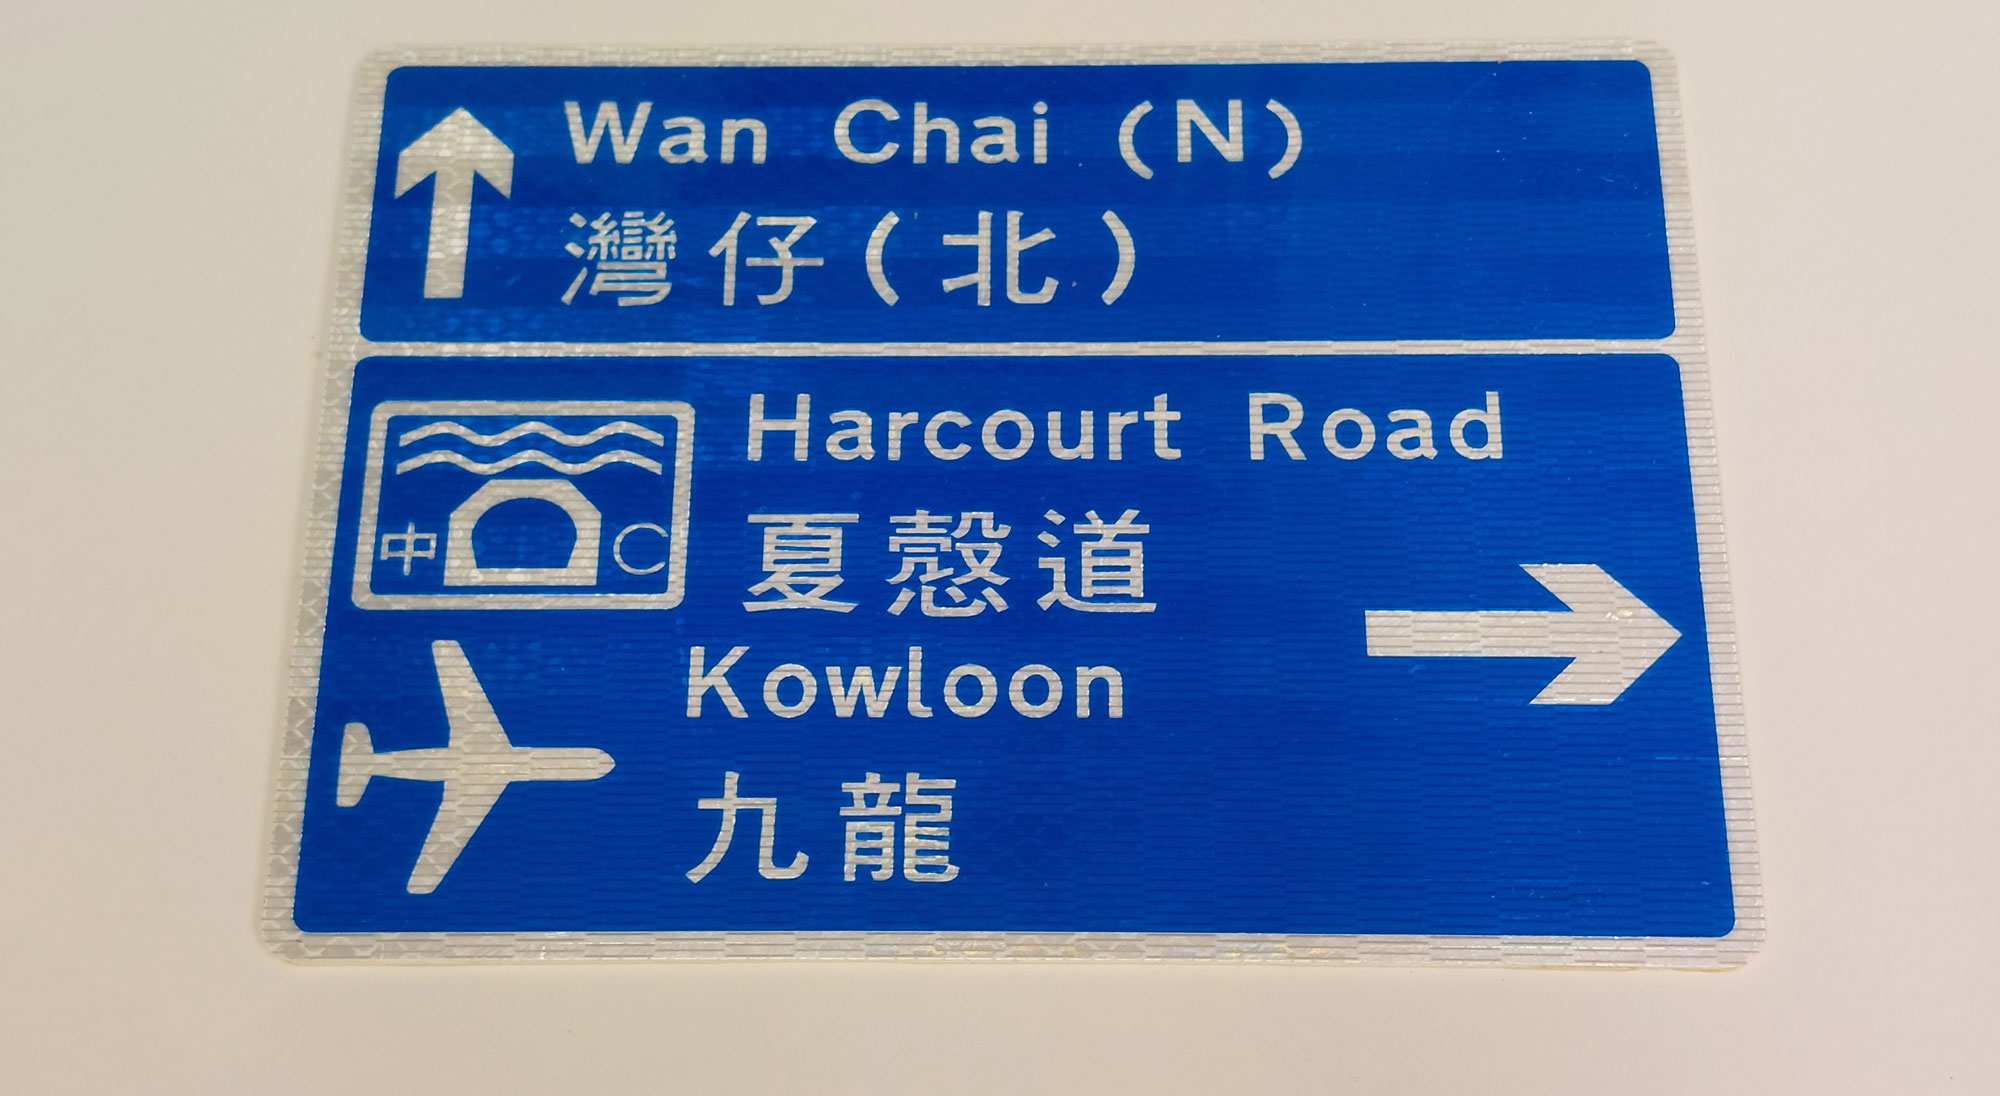 A miniature road sign made by persons in custody.